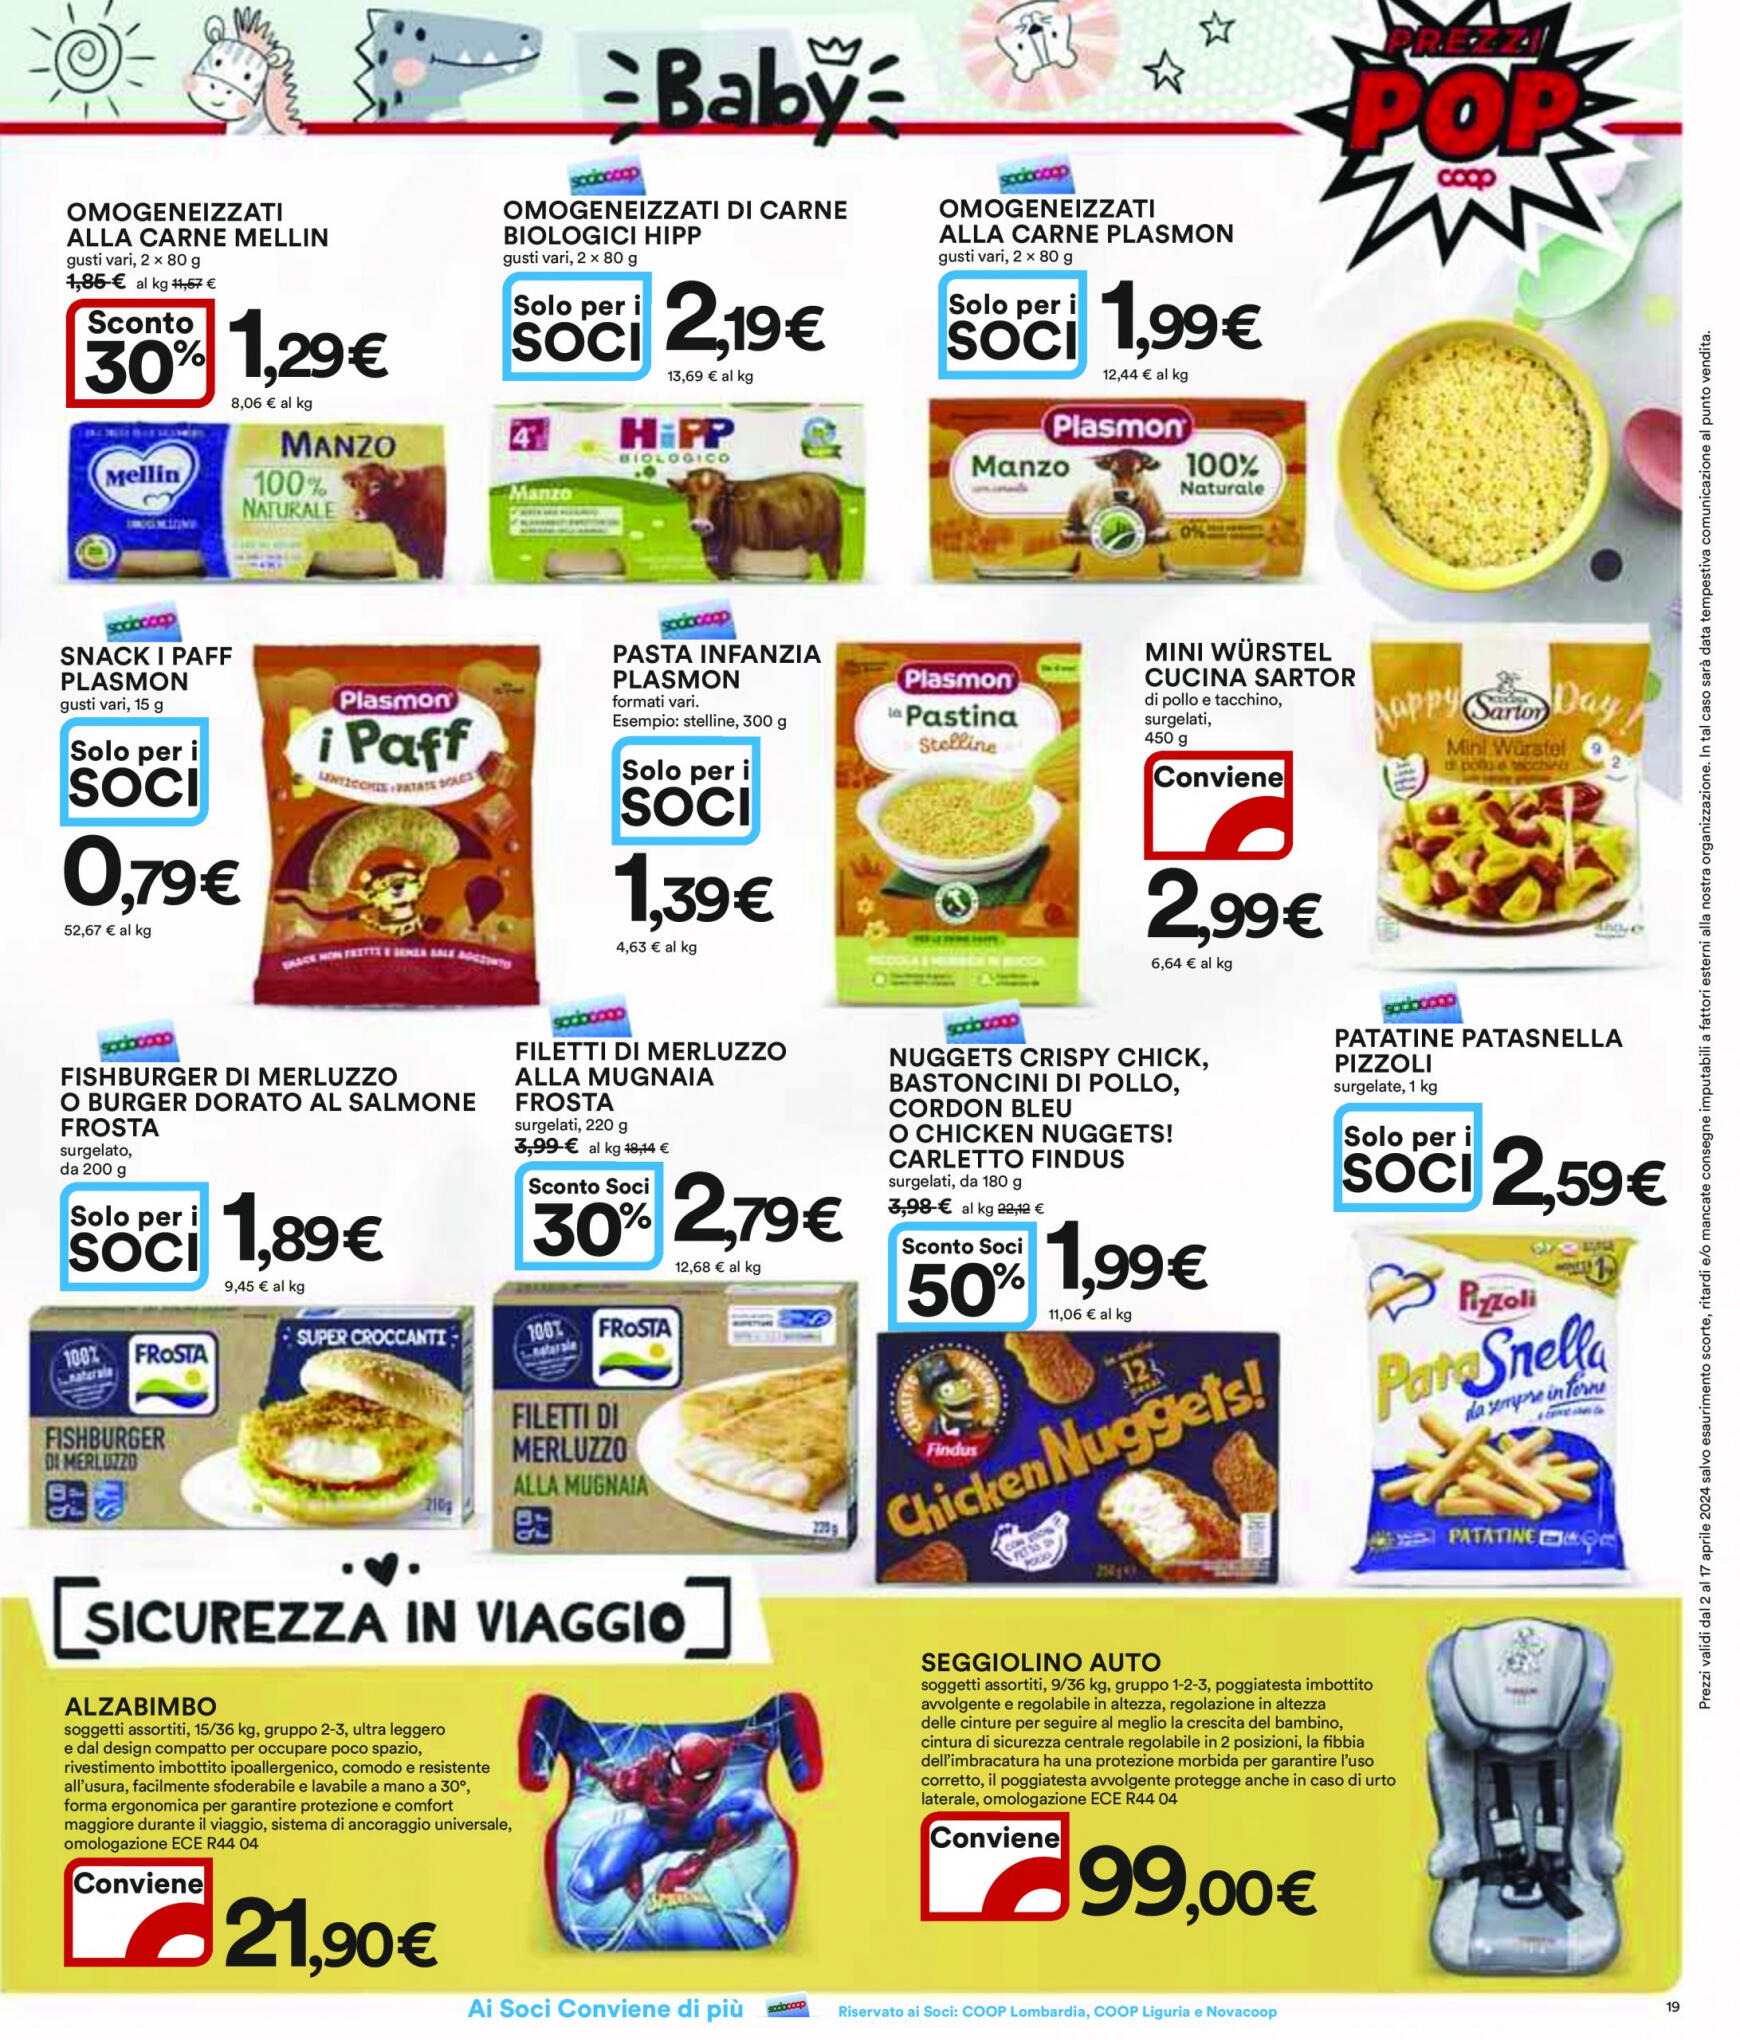 coop - Nuovo volantino Coop 02.04. - 17.04. - page: 19